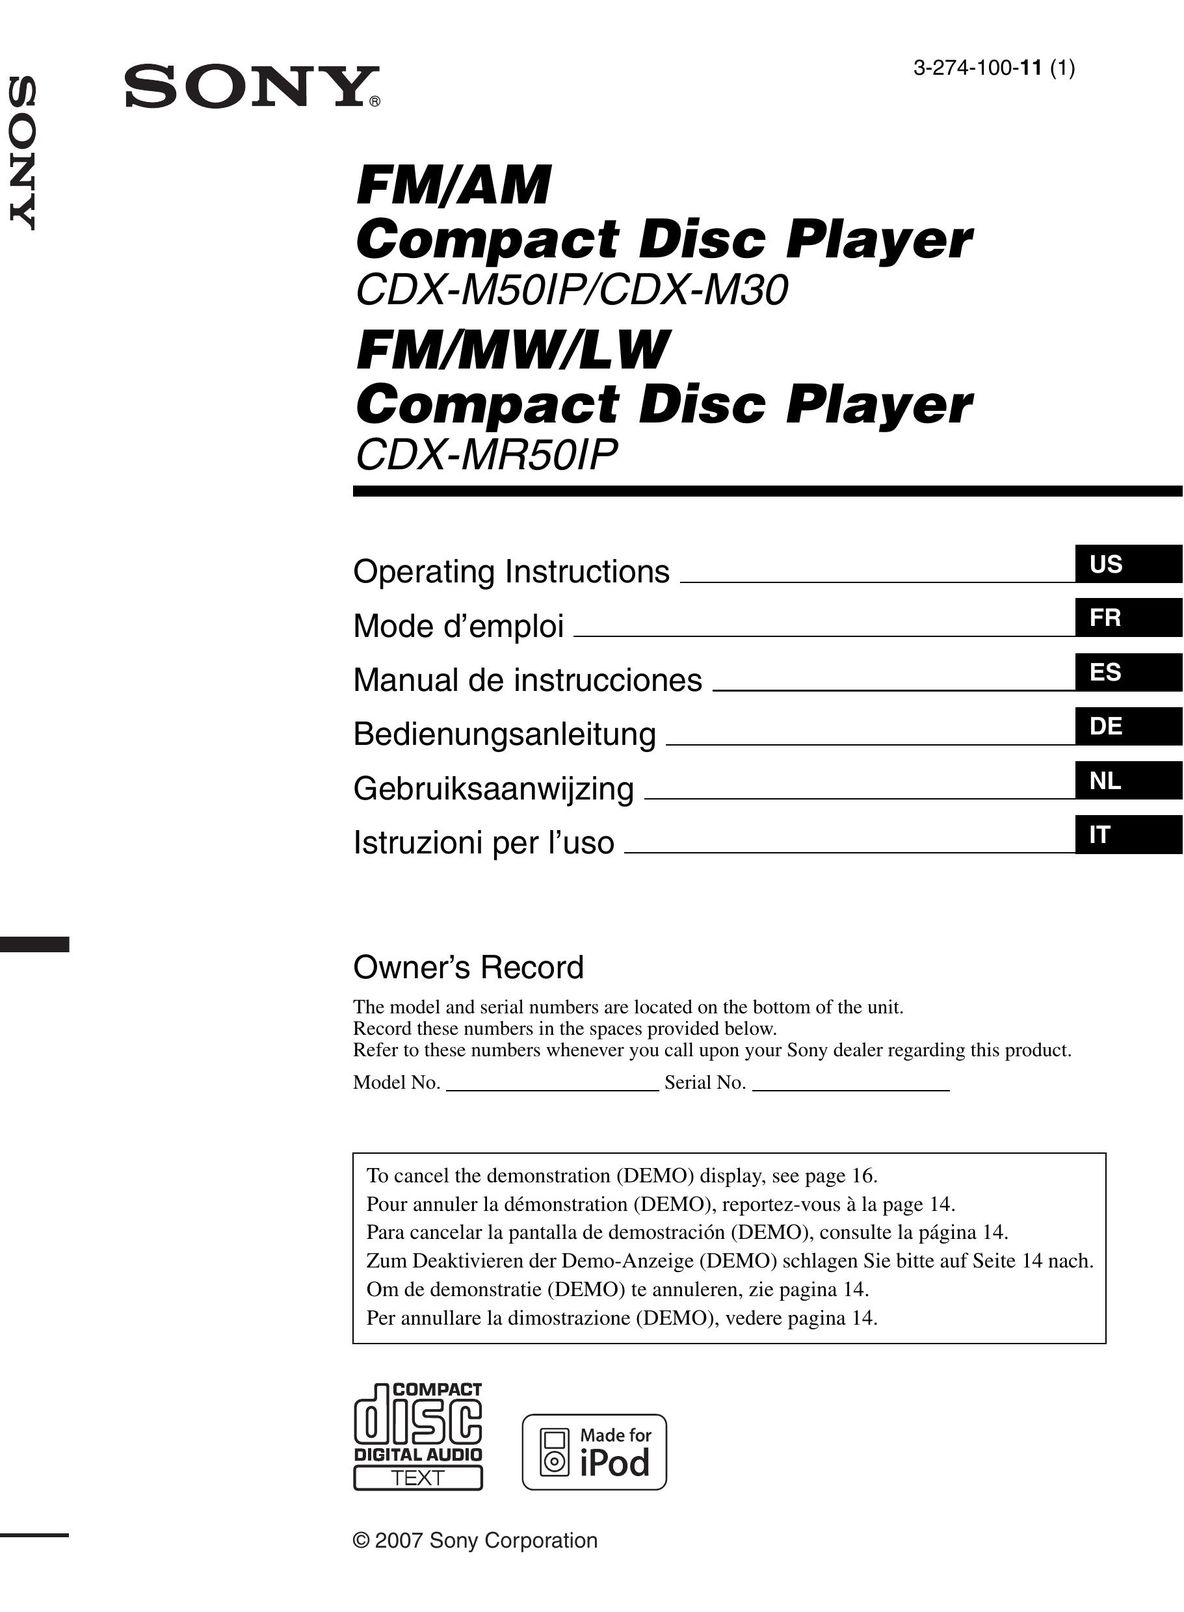 Sony CDX-M30 Portable CD Player User Manual